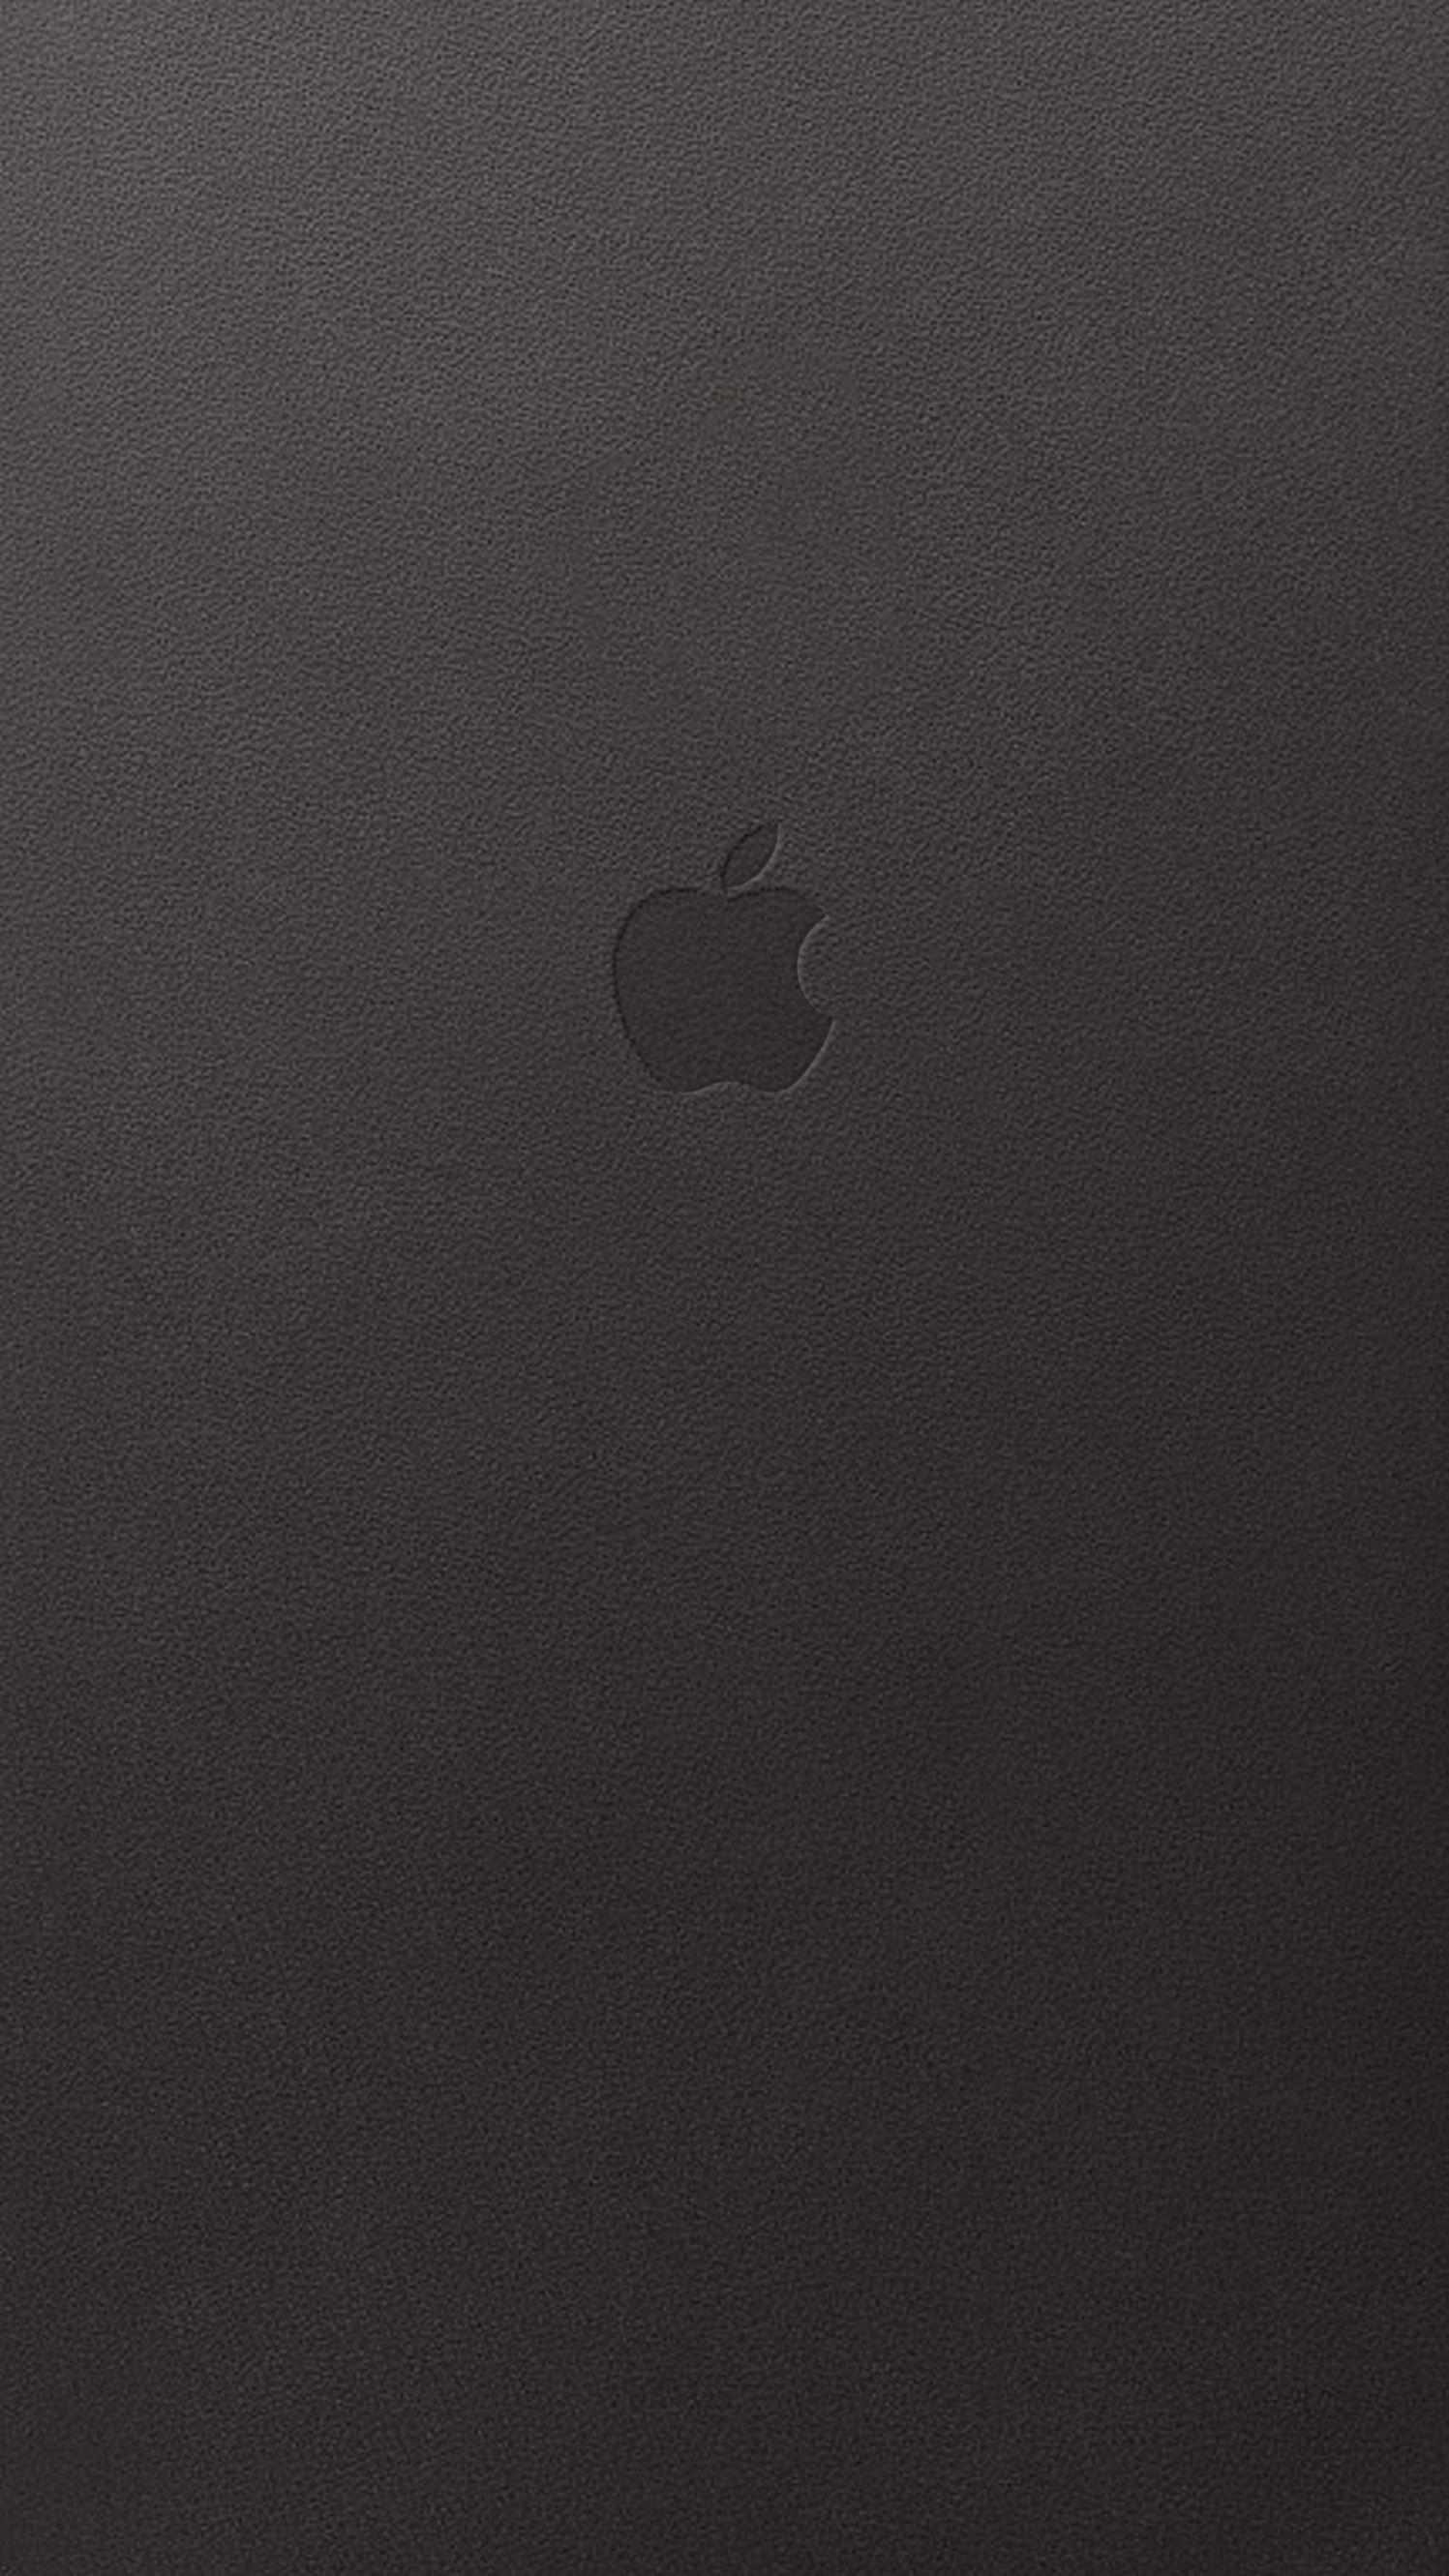 white leather iphone wallpaper